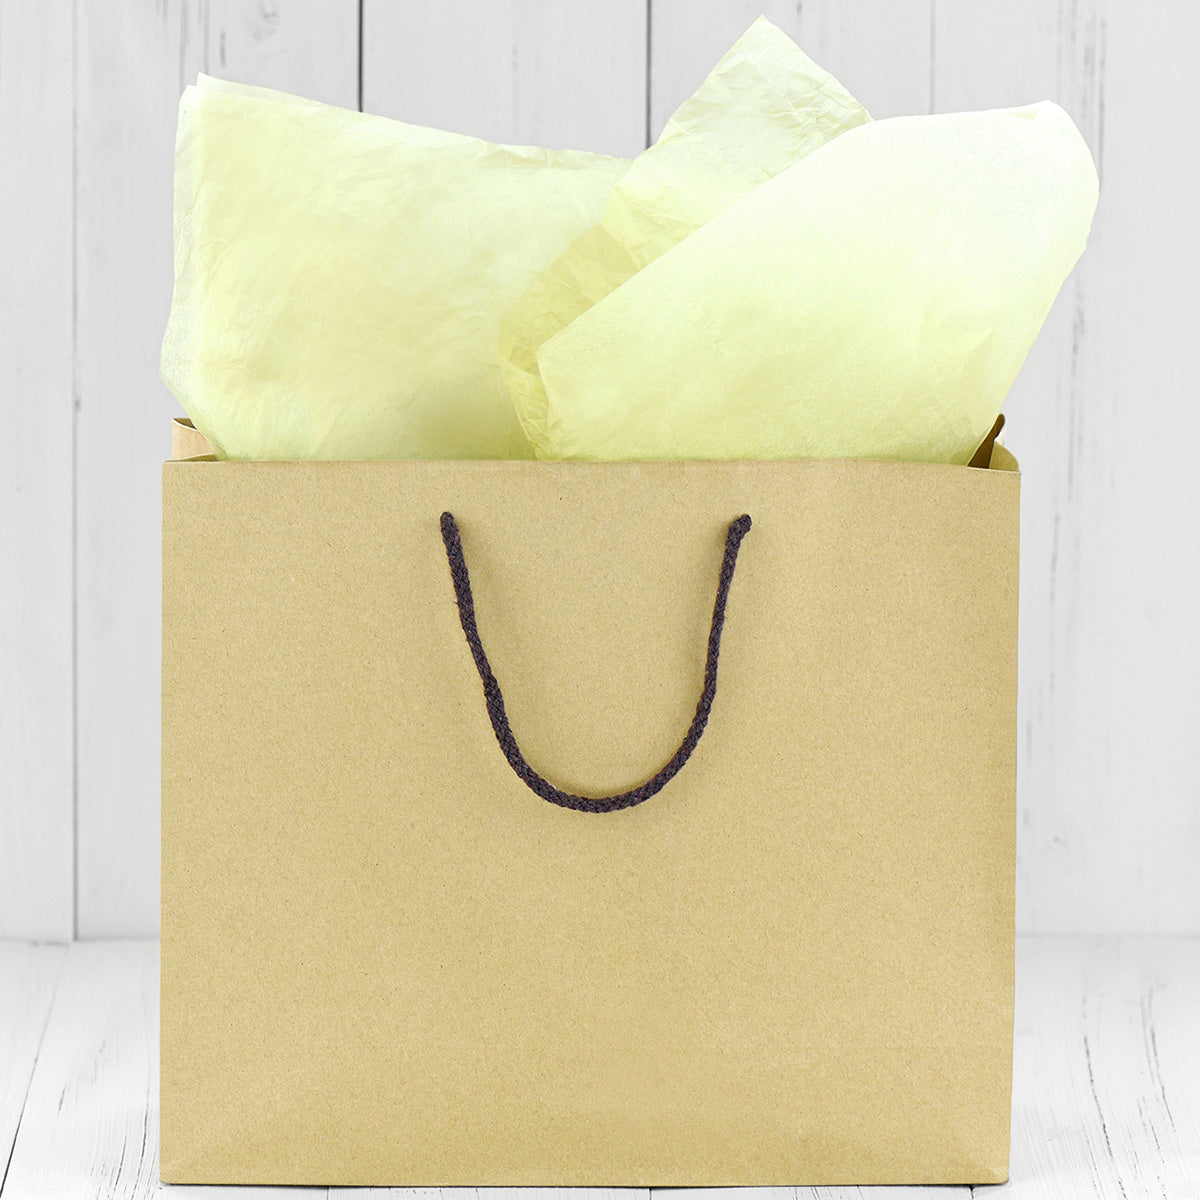 50 Sheets Light Yellow Wrapping Tissue Paper